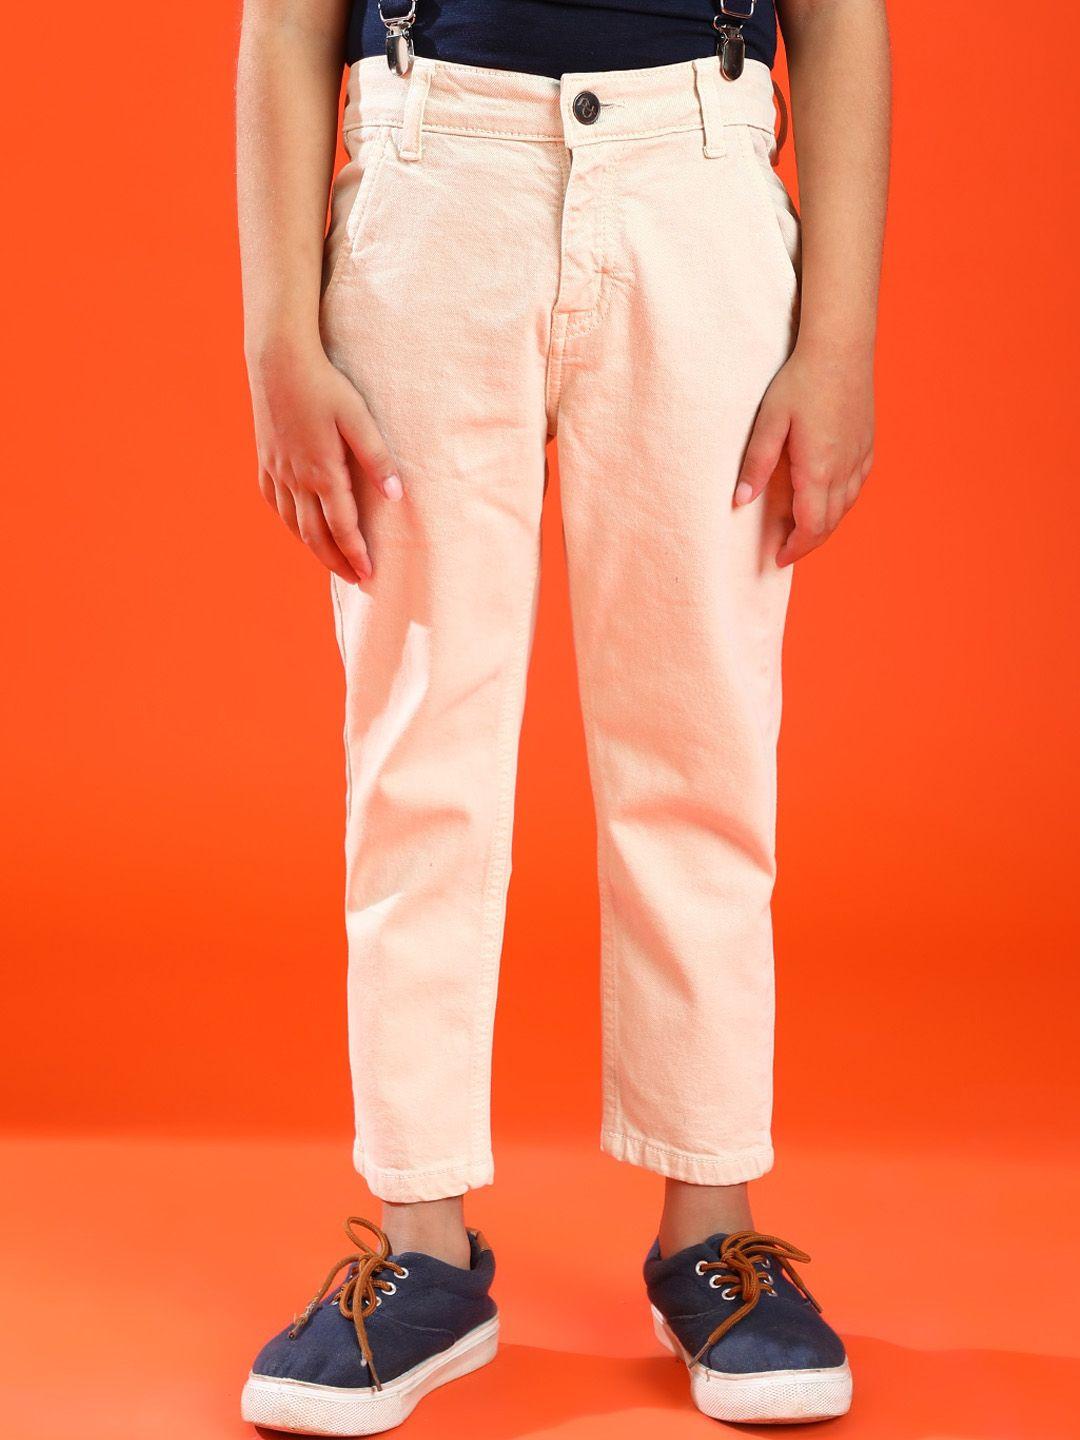 tales-&-stories-boys-off-white-slim-fit-trousers